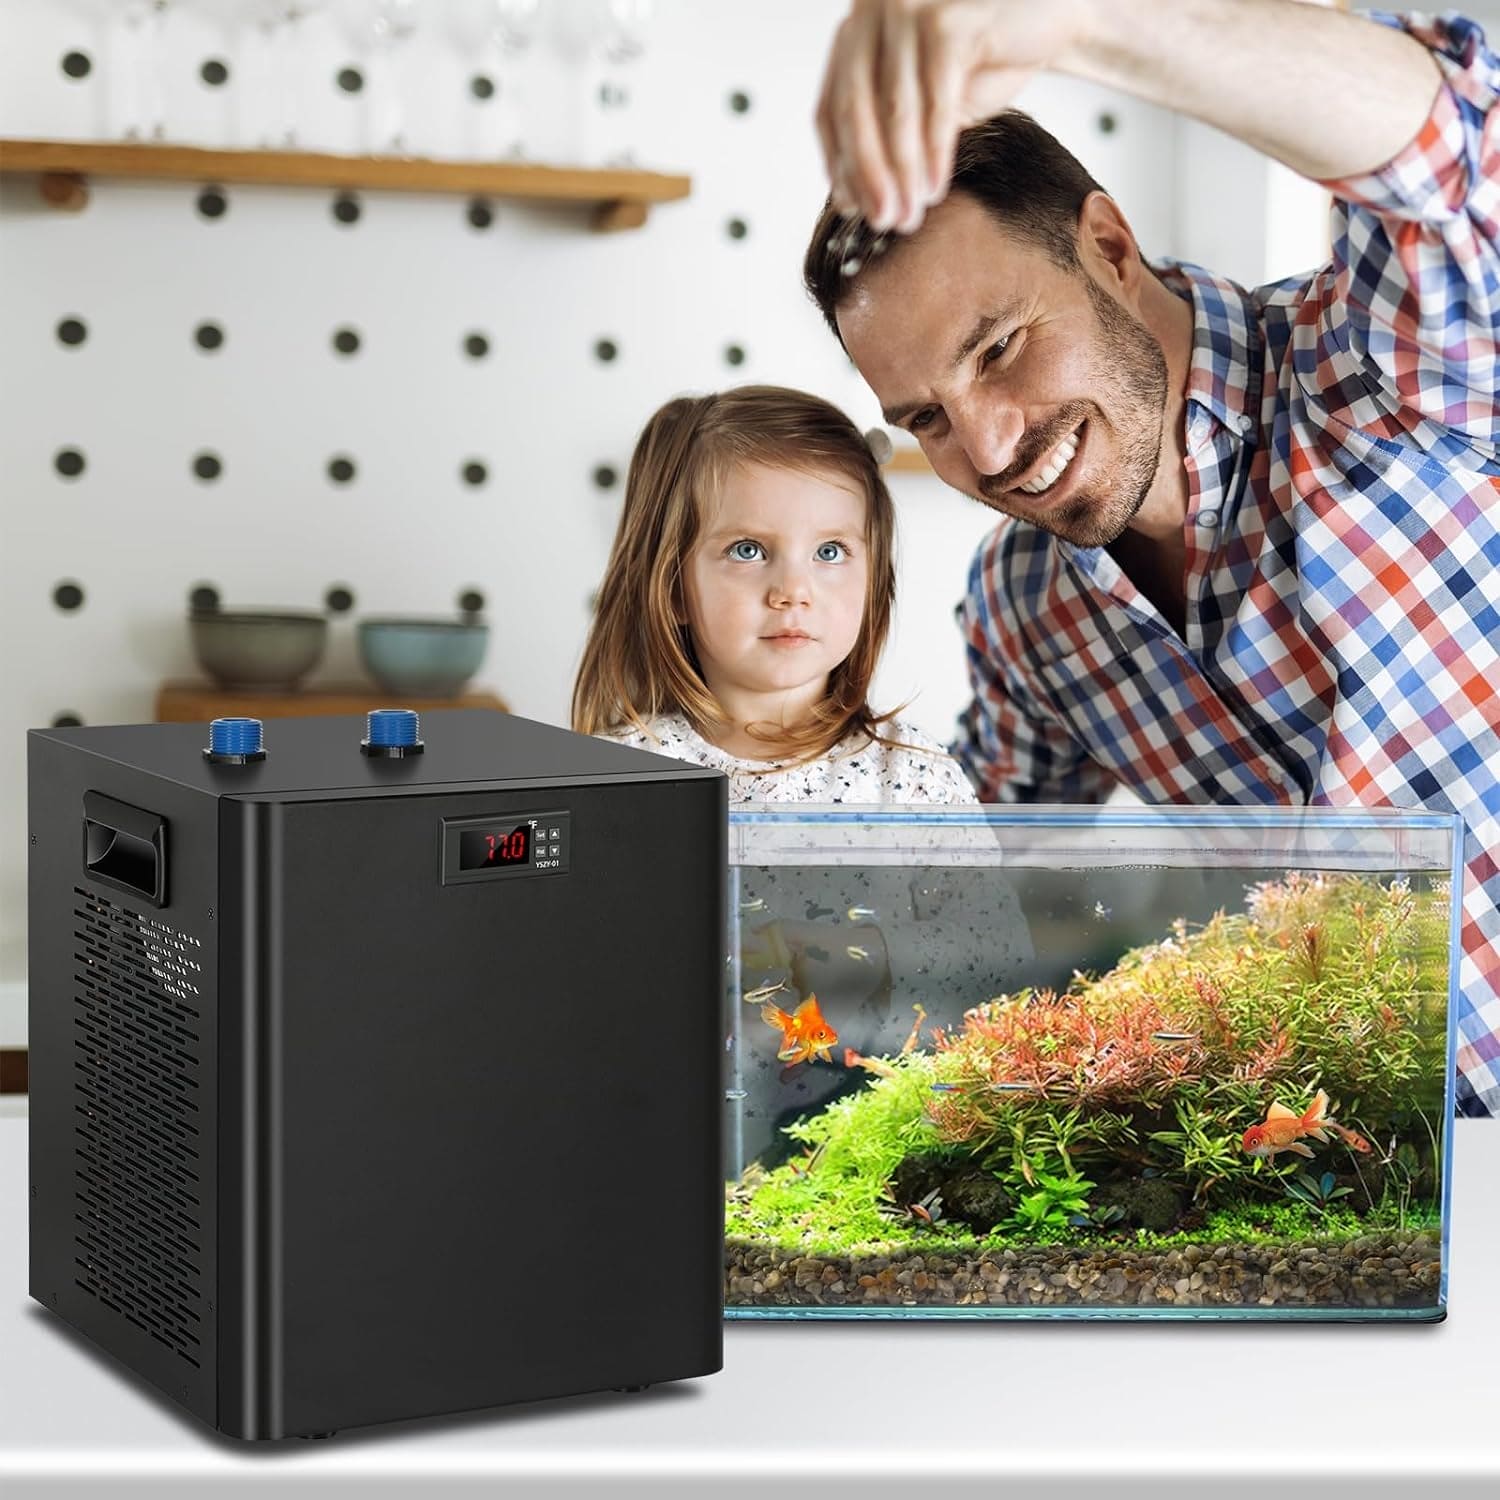 79 Gal Aquarium Chiller, 1/3 HP Fish Tank Water Chiller with Quiet Design Compressor, Refrigeration for Hydroponic System Axolotl Jellyfish Coral Reef 300L, Black